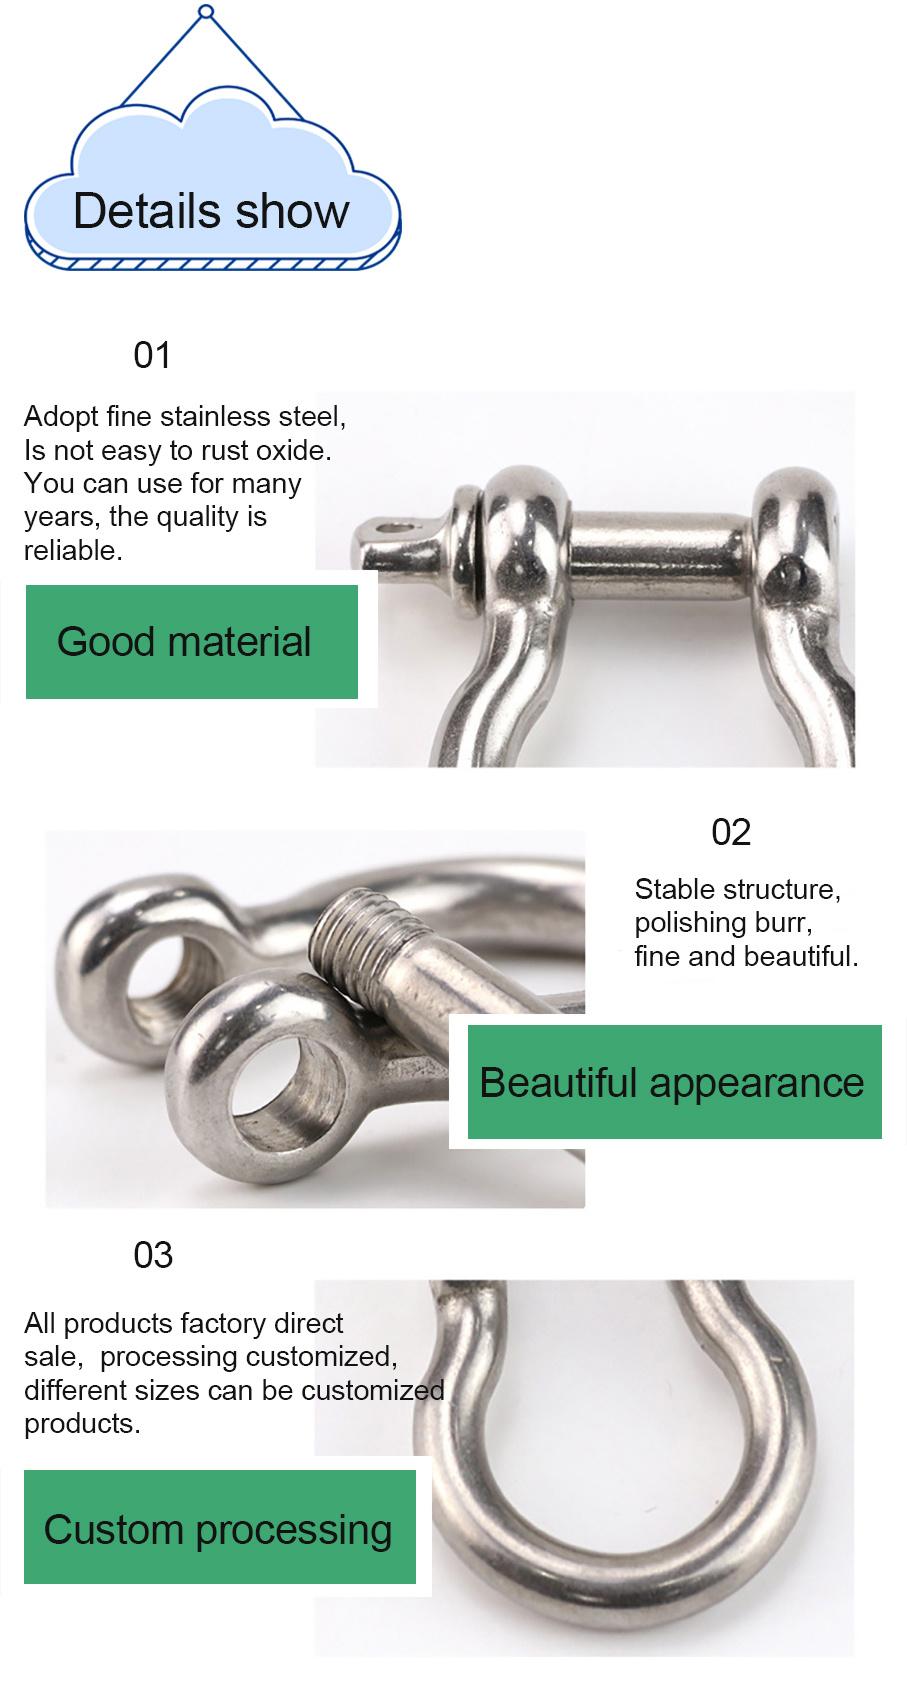 Stainless Steel Us Secutity Anchor Shackle of Rigging Marine Hardware